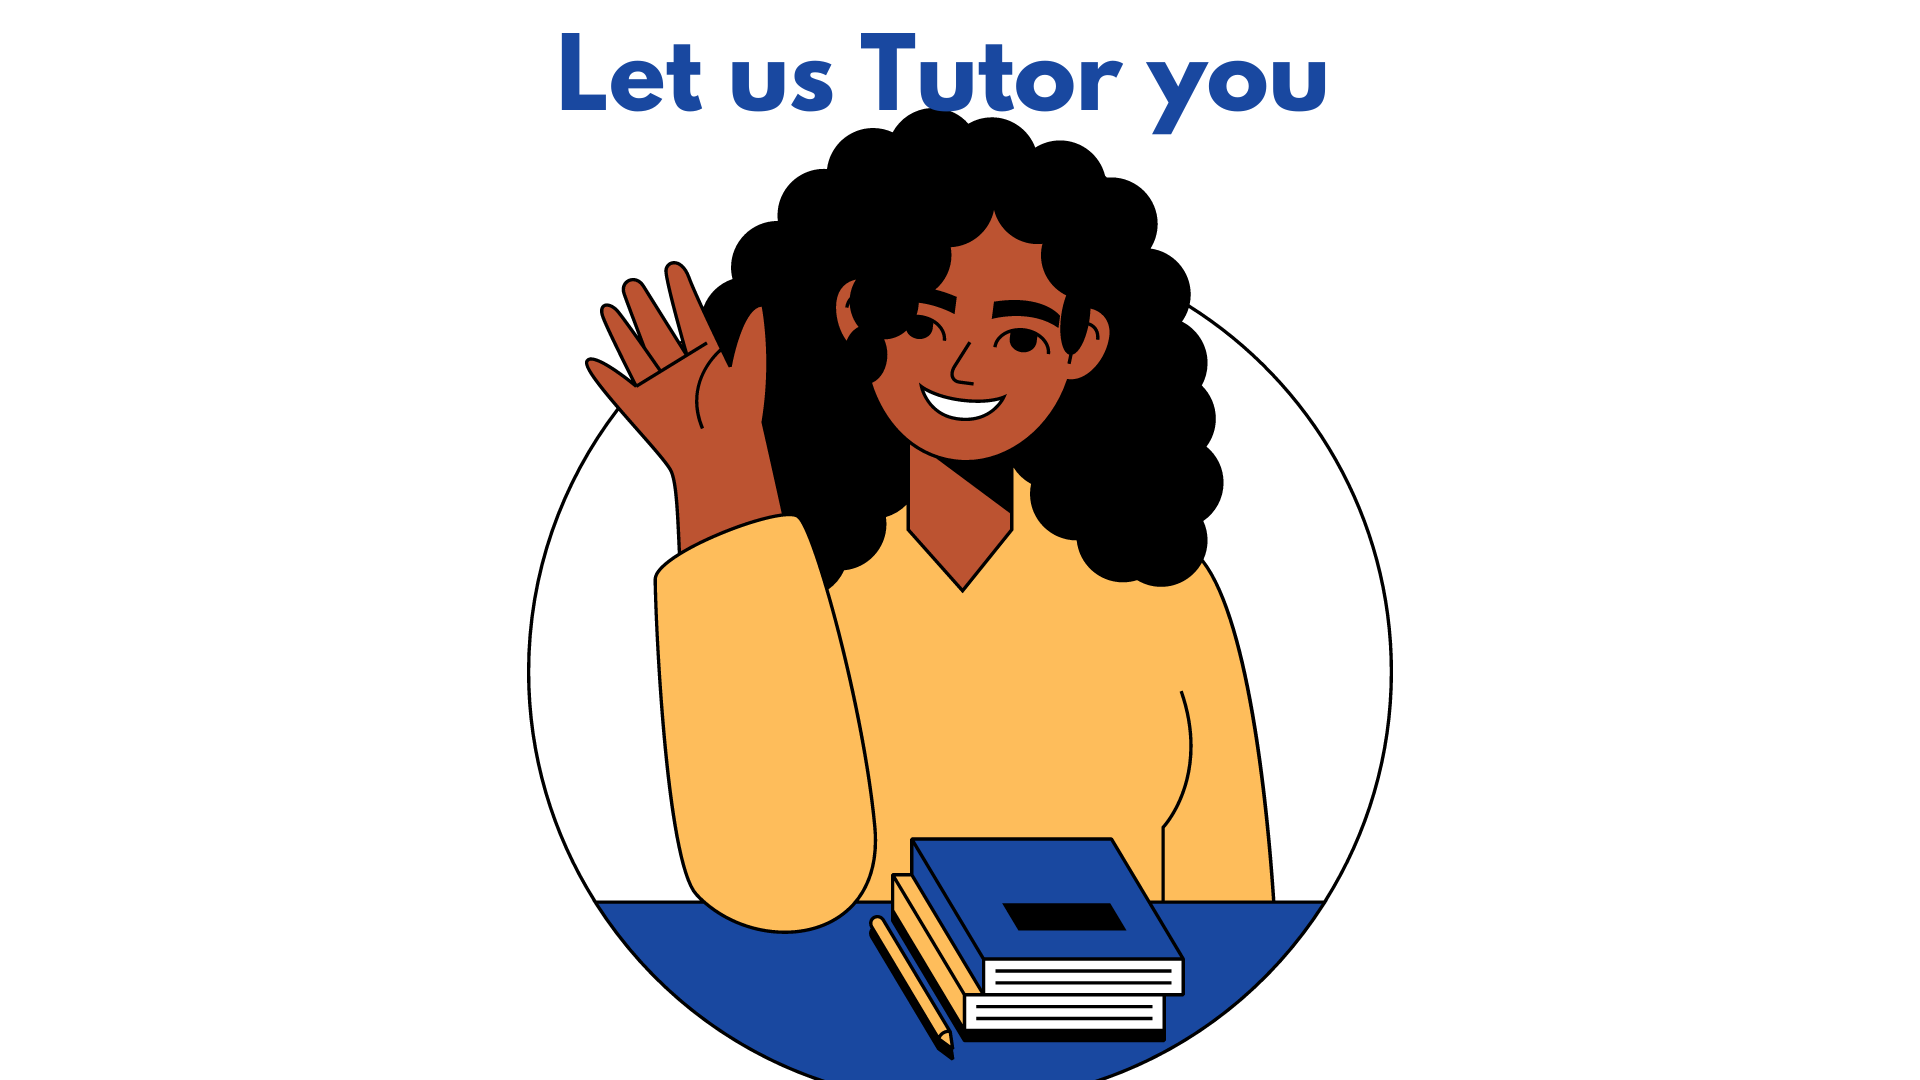 Apply for tutoring now